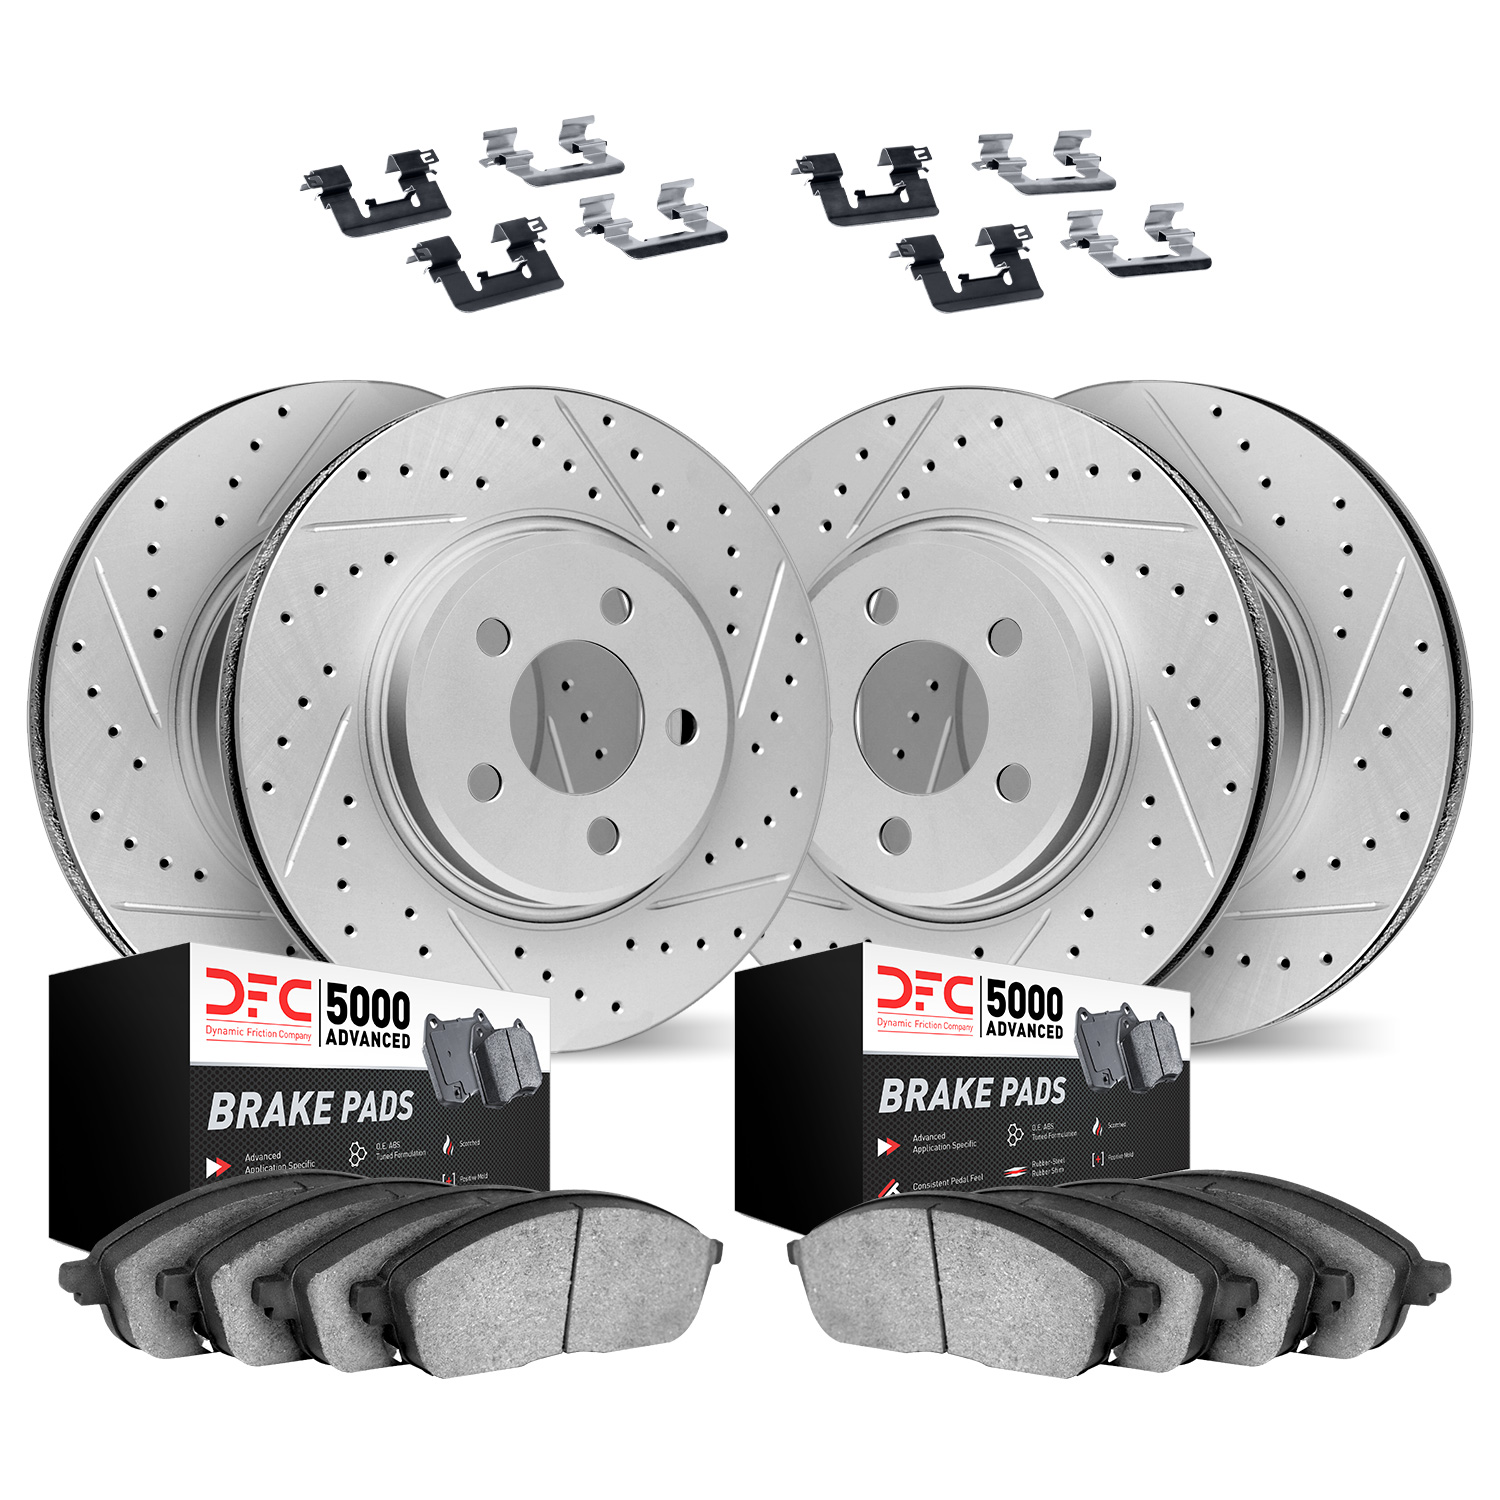 2514-31015 Geoperformance Drilled/Slotted Rotors w/5000 Advanced Brake Pads Kit & Hardware, 2008-2011 BMW, Position: Front and R